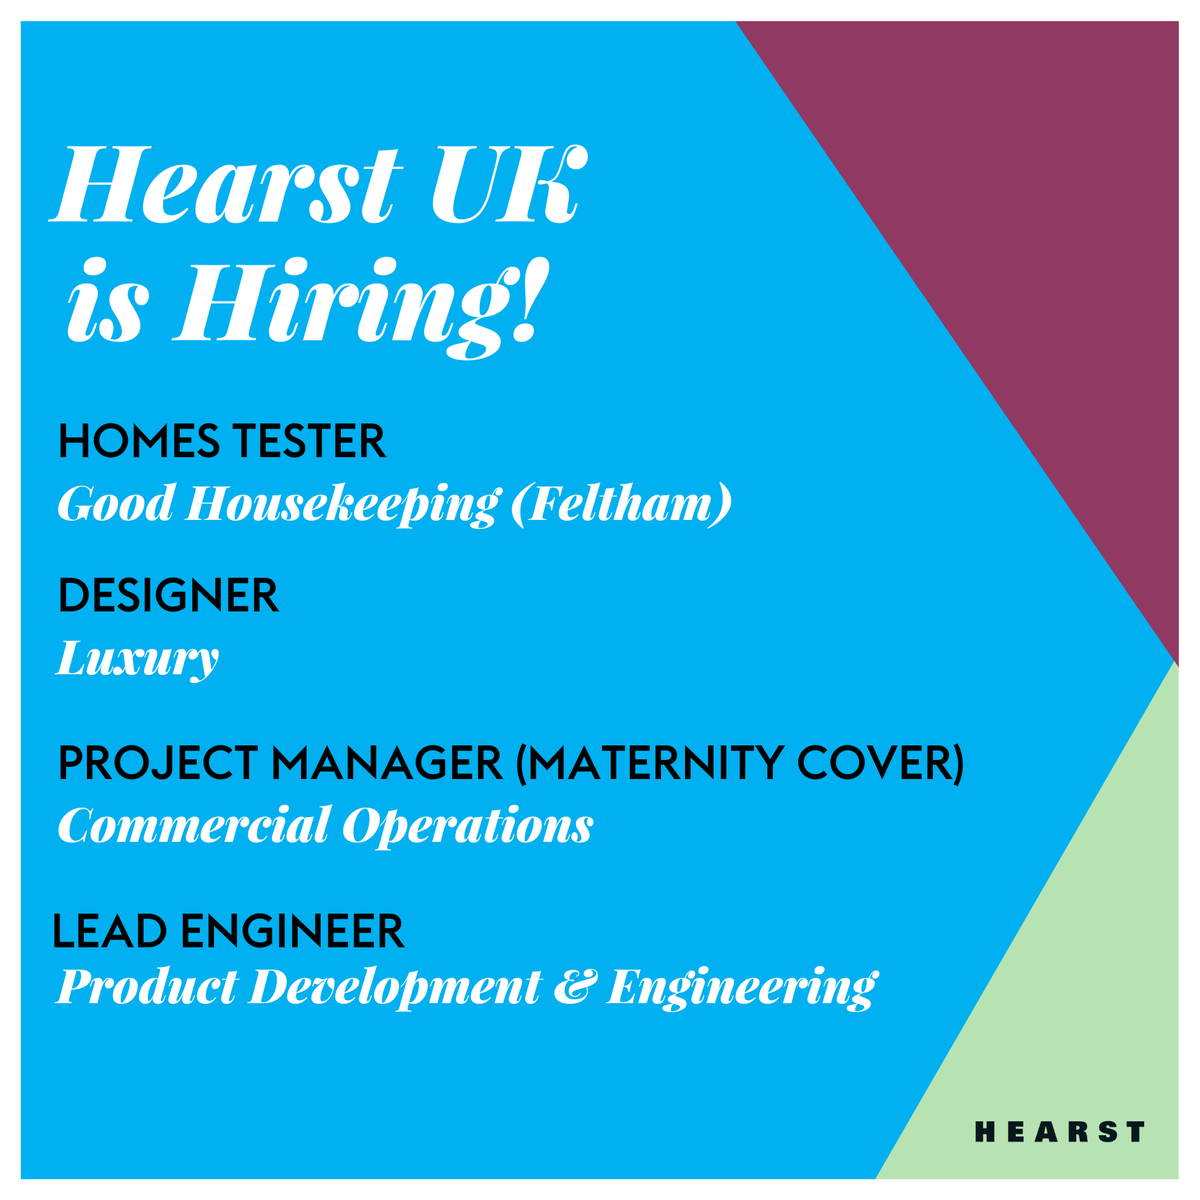 We’re #hiring. 🚀 Visit the link below to learn more, and kickstart the next chapter of your career at Hearst UK 🌟 bit.ly/3V8aiBf #hearstuk #youbelongathearst 😌